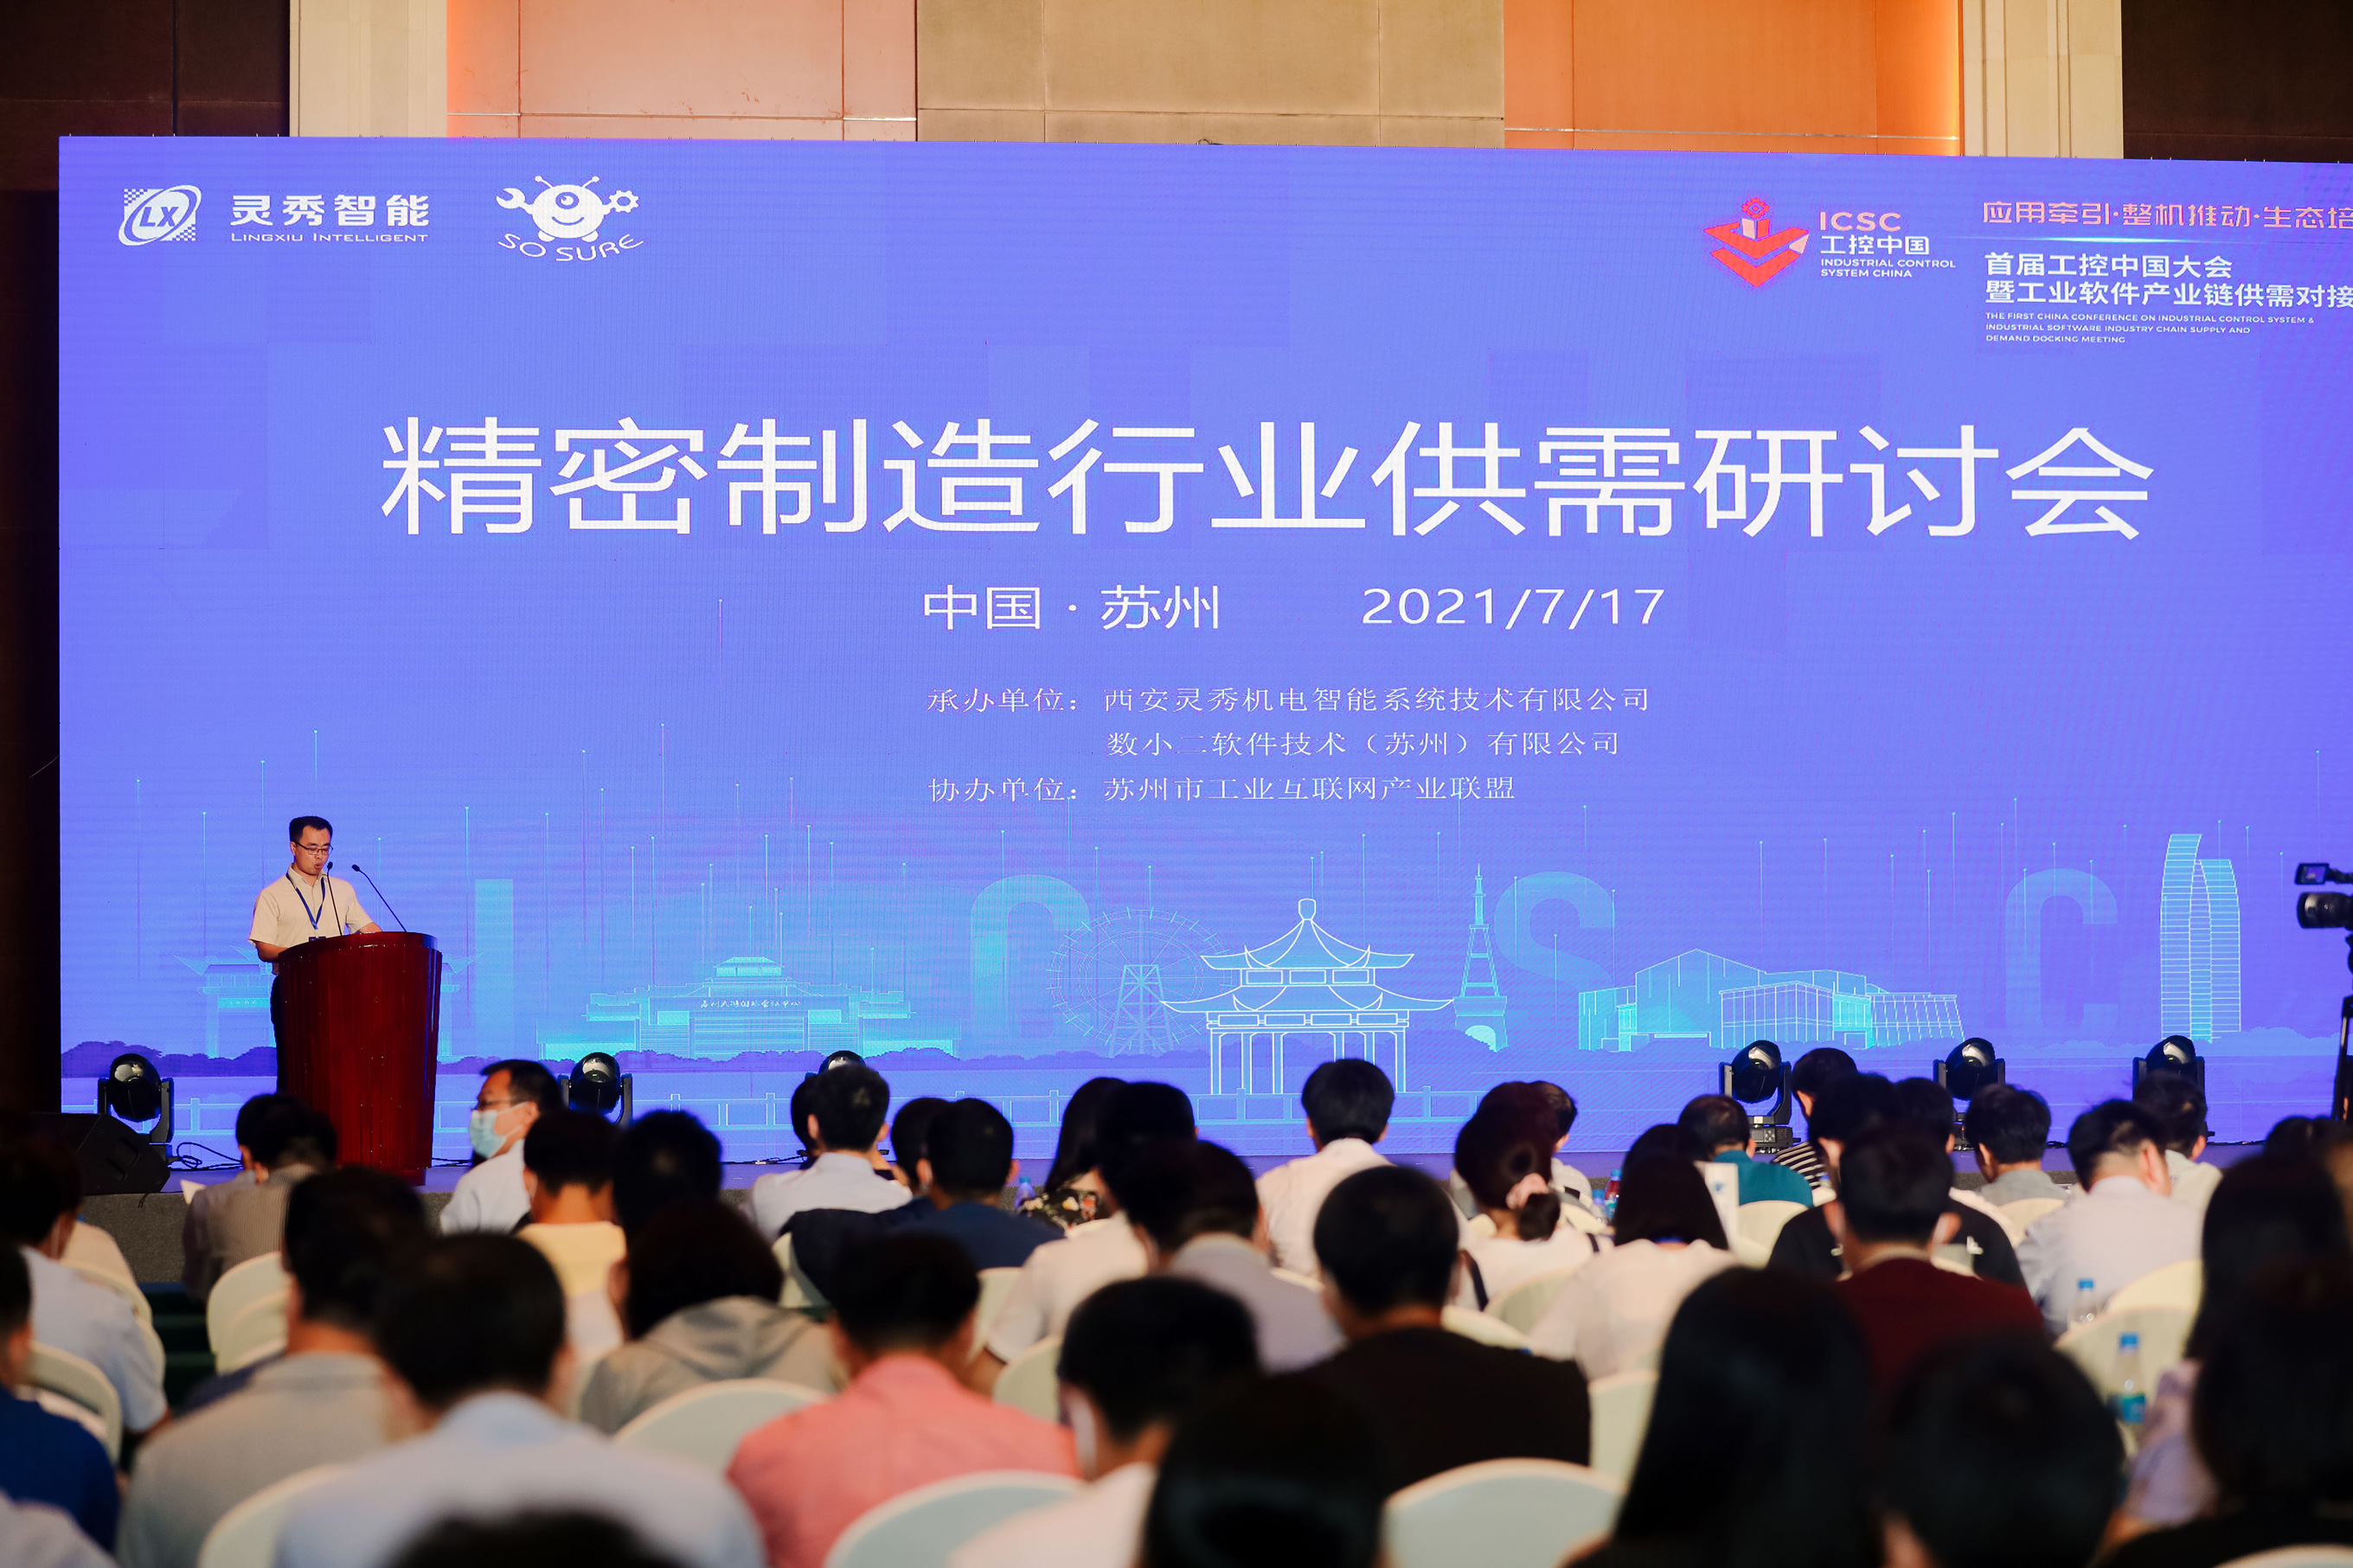 The sub forum of the first industrial control China Conference - supply and demand seminar of precis